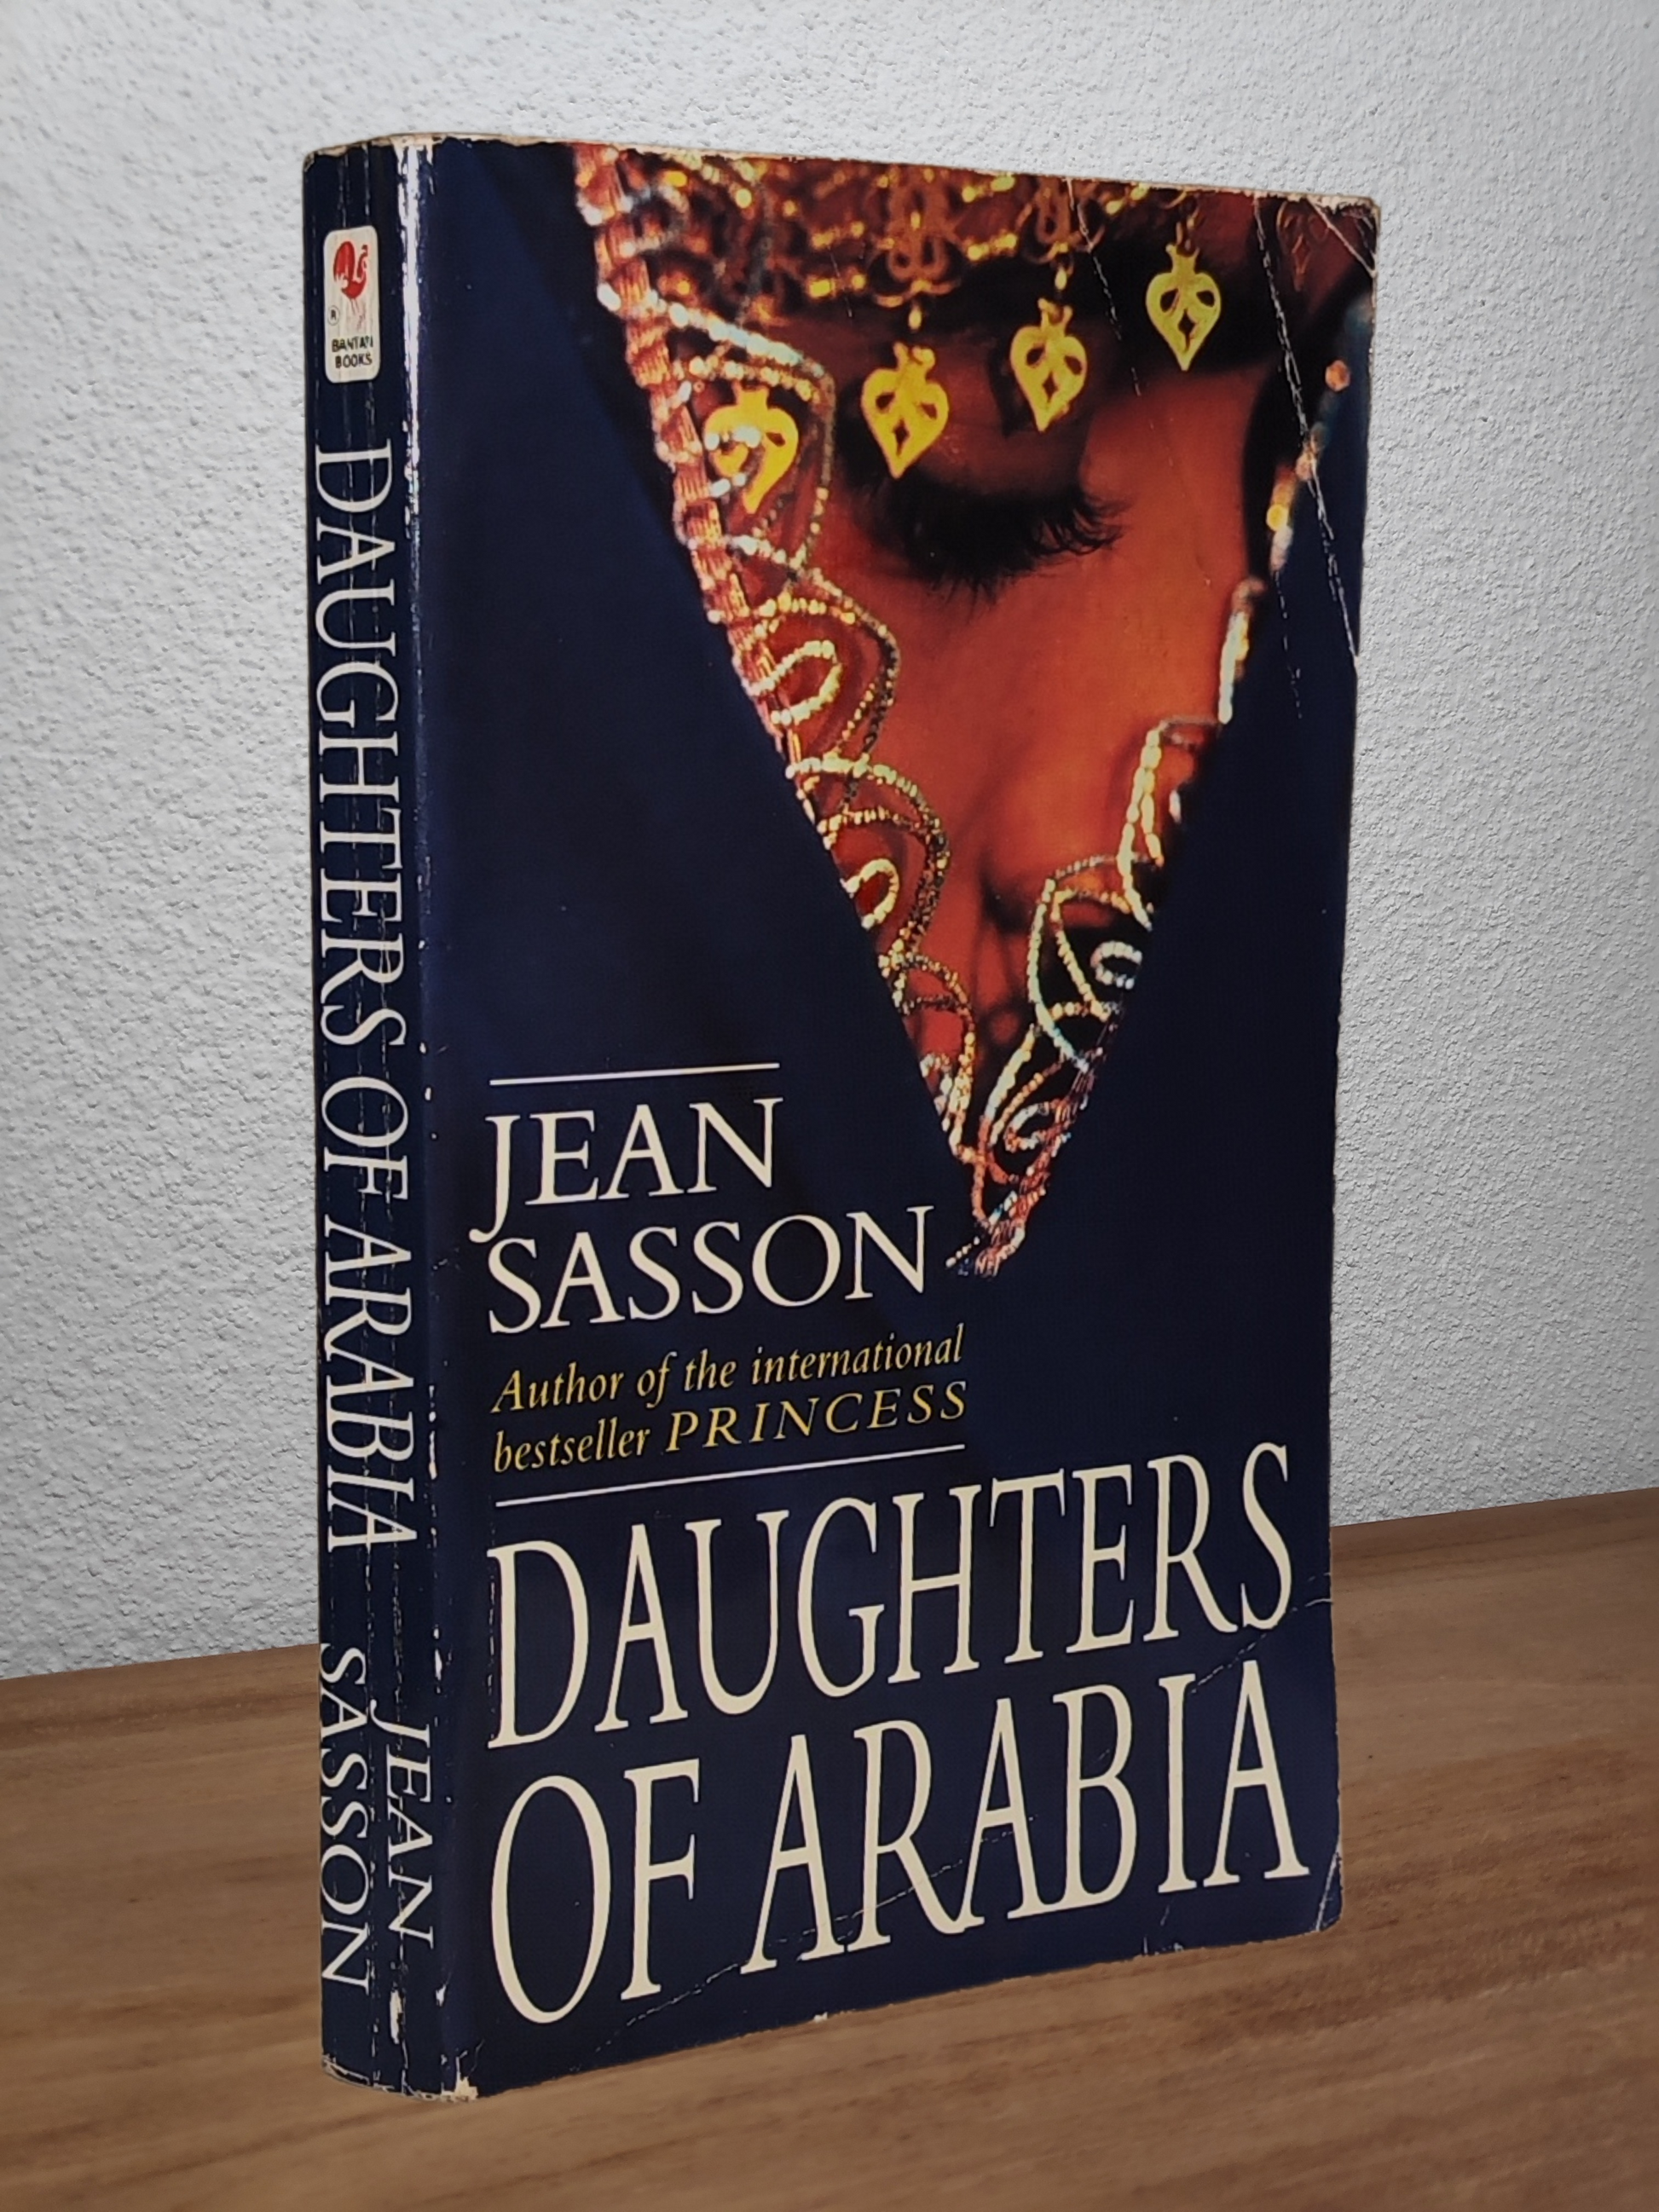 Jean Sasson - Daughters of Arabia   - Second-hand english book to deliver in Zurich & Switzerland